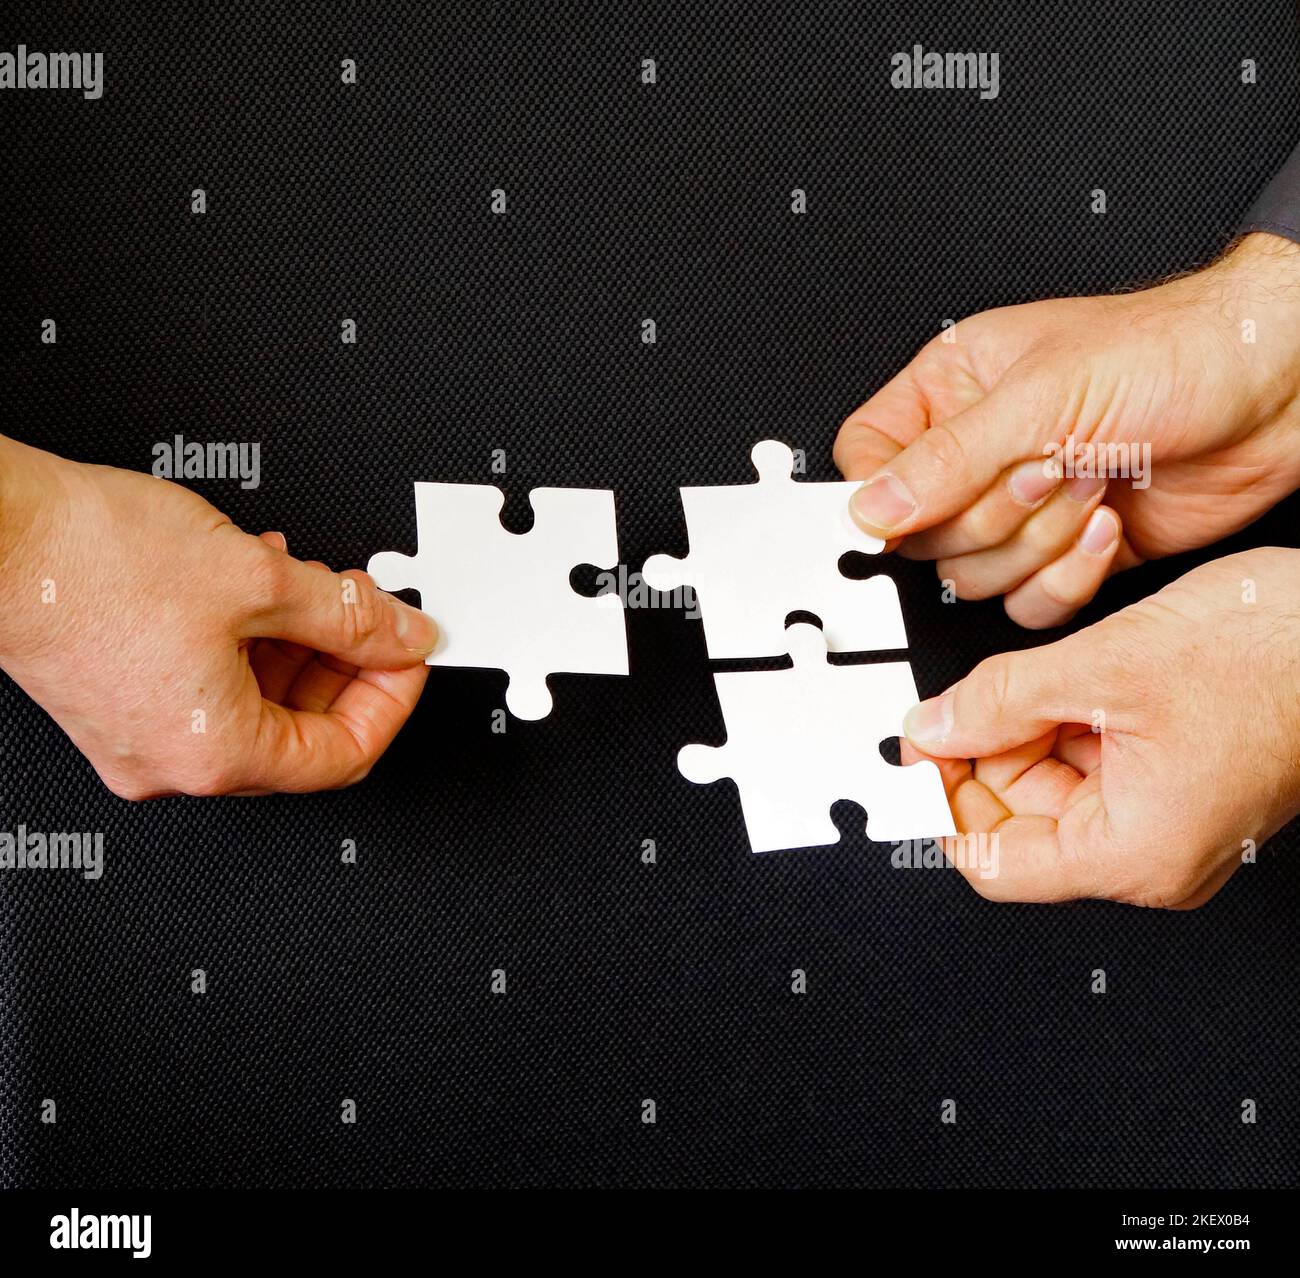 a good collaboration between colleagues or business partners in finding solutions together Stock Photo